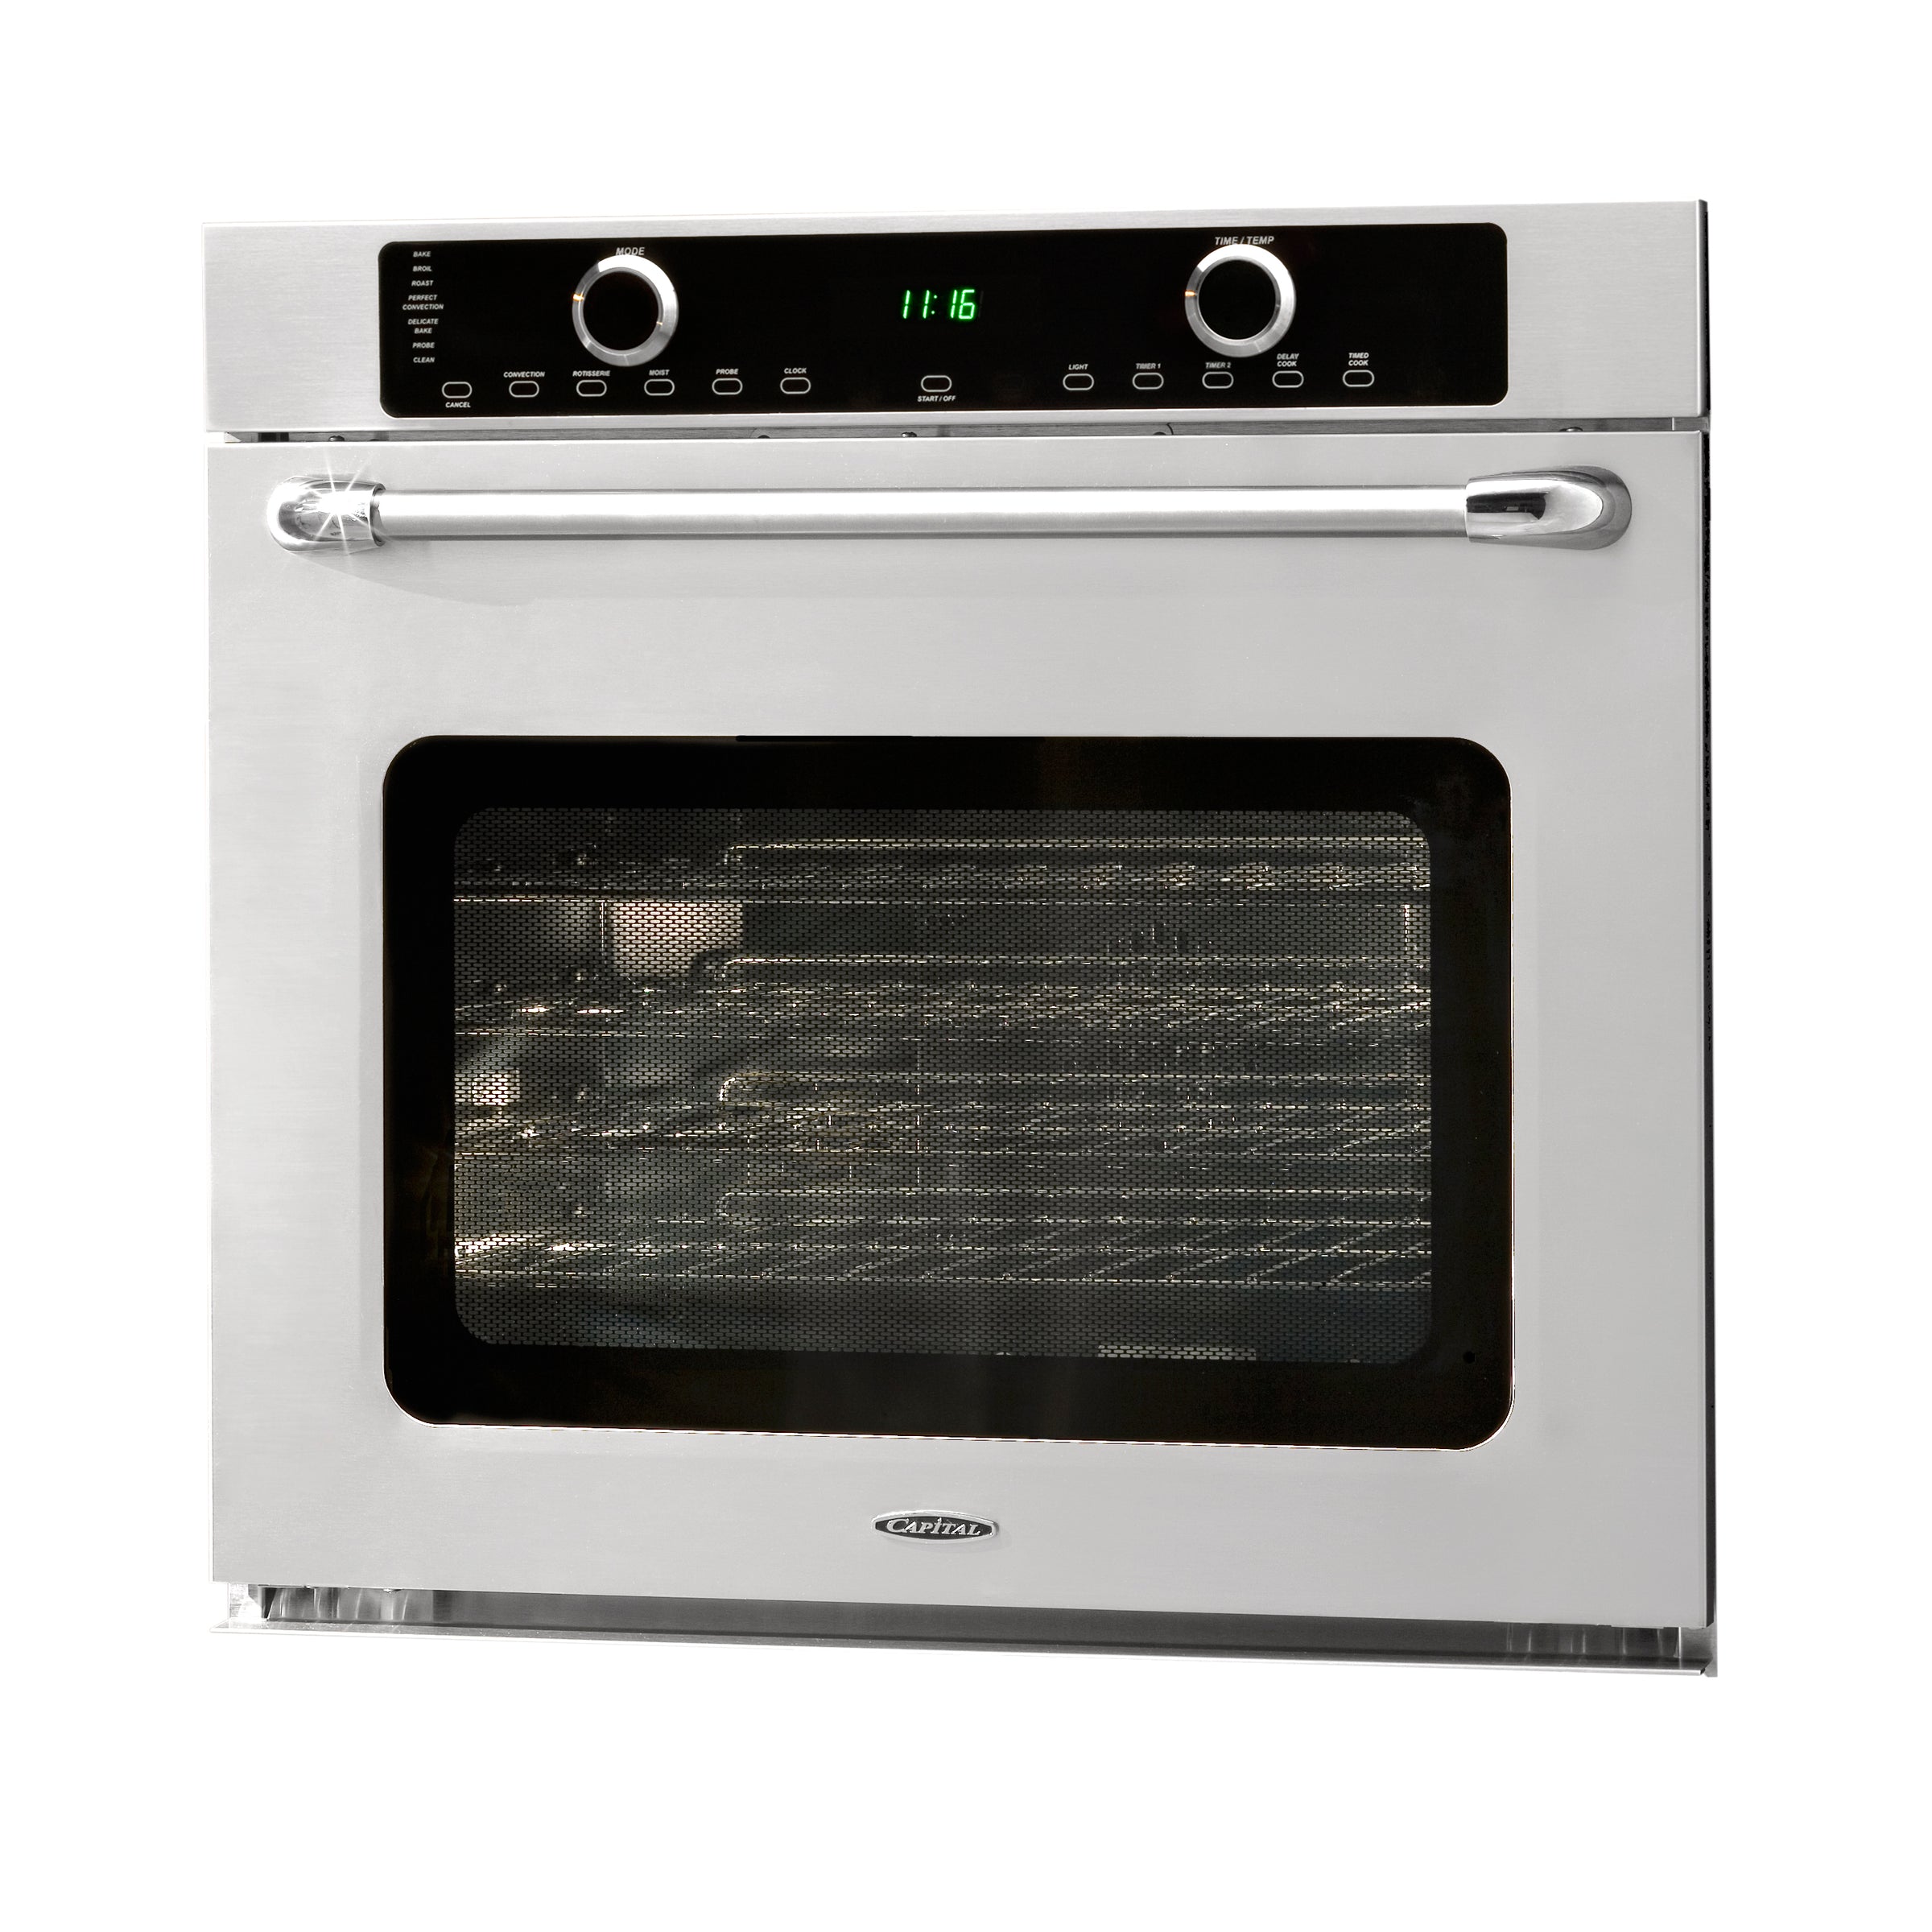 Wall Ovens